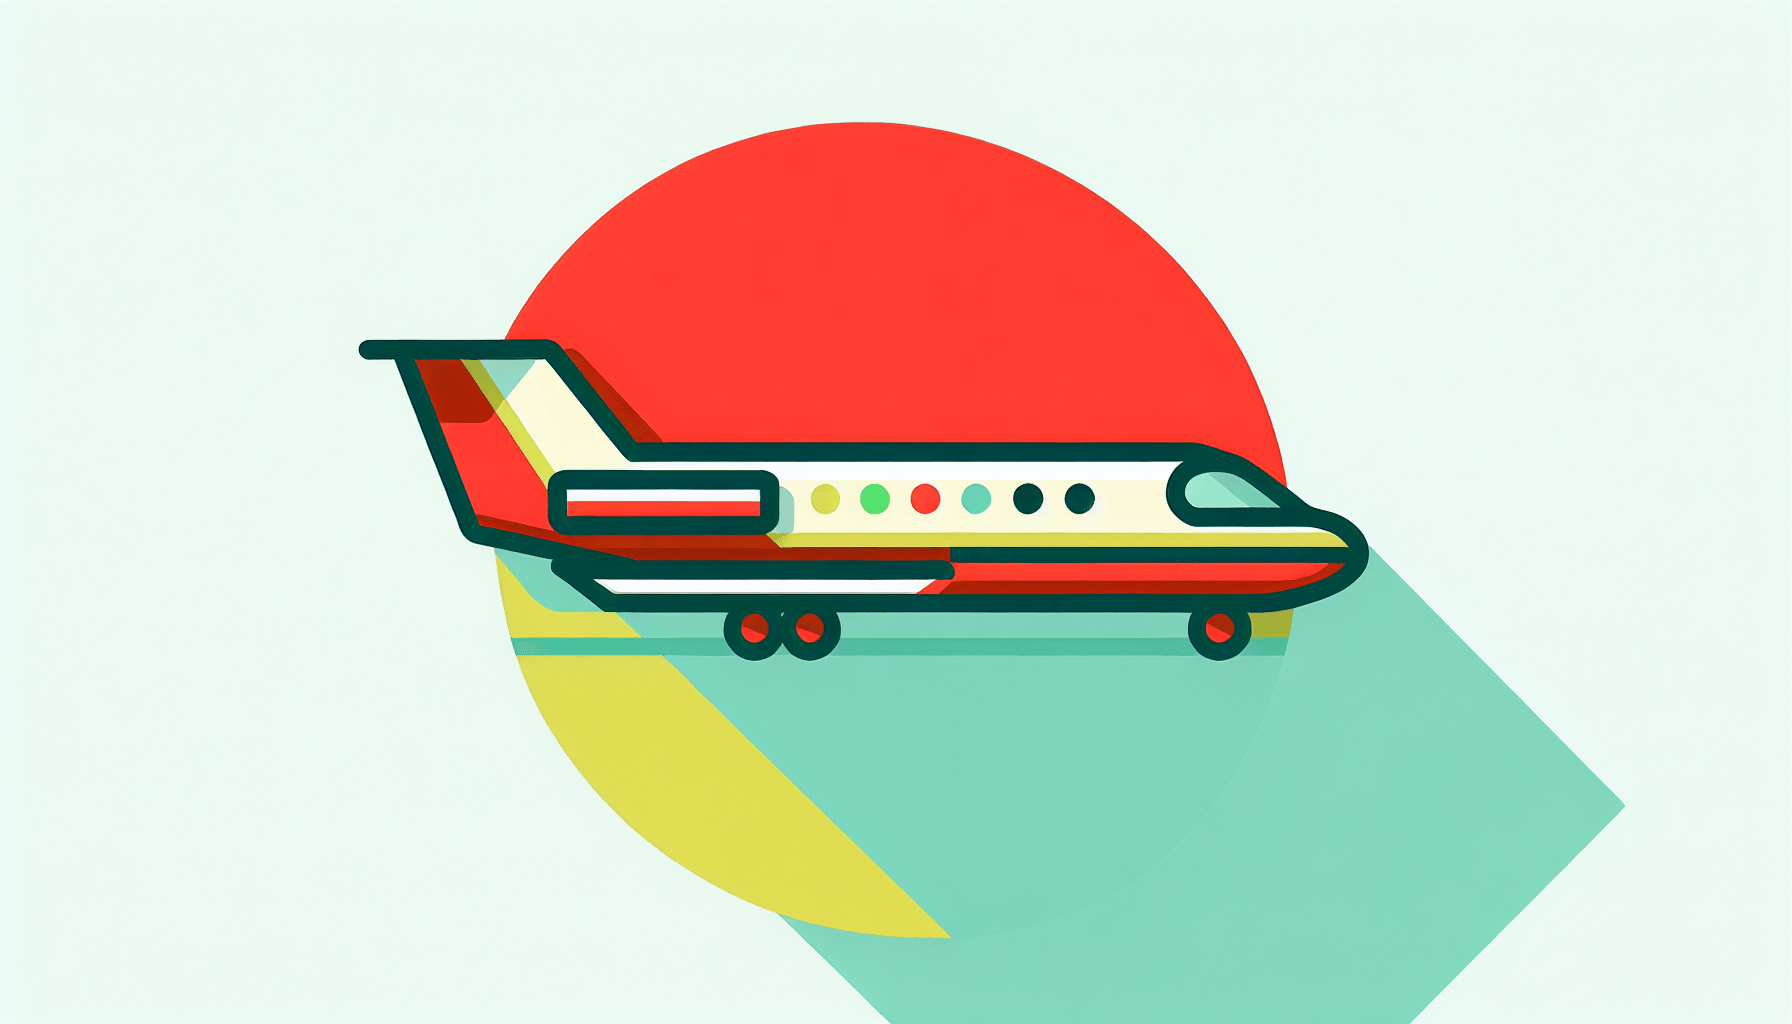 Private jet in flat illustration style and white background, red #f47574, green #88c7a8, yellow #fcc44b, and blue #645bc8 colors.